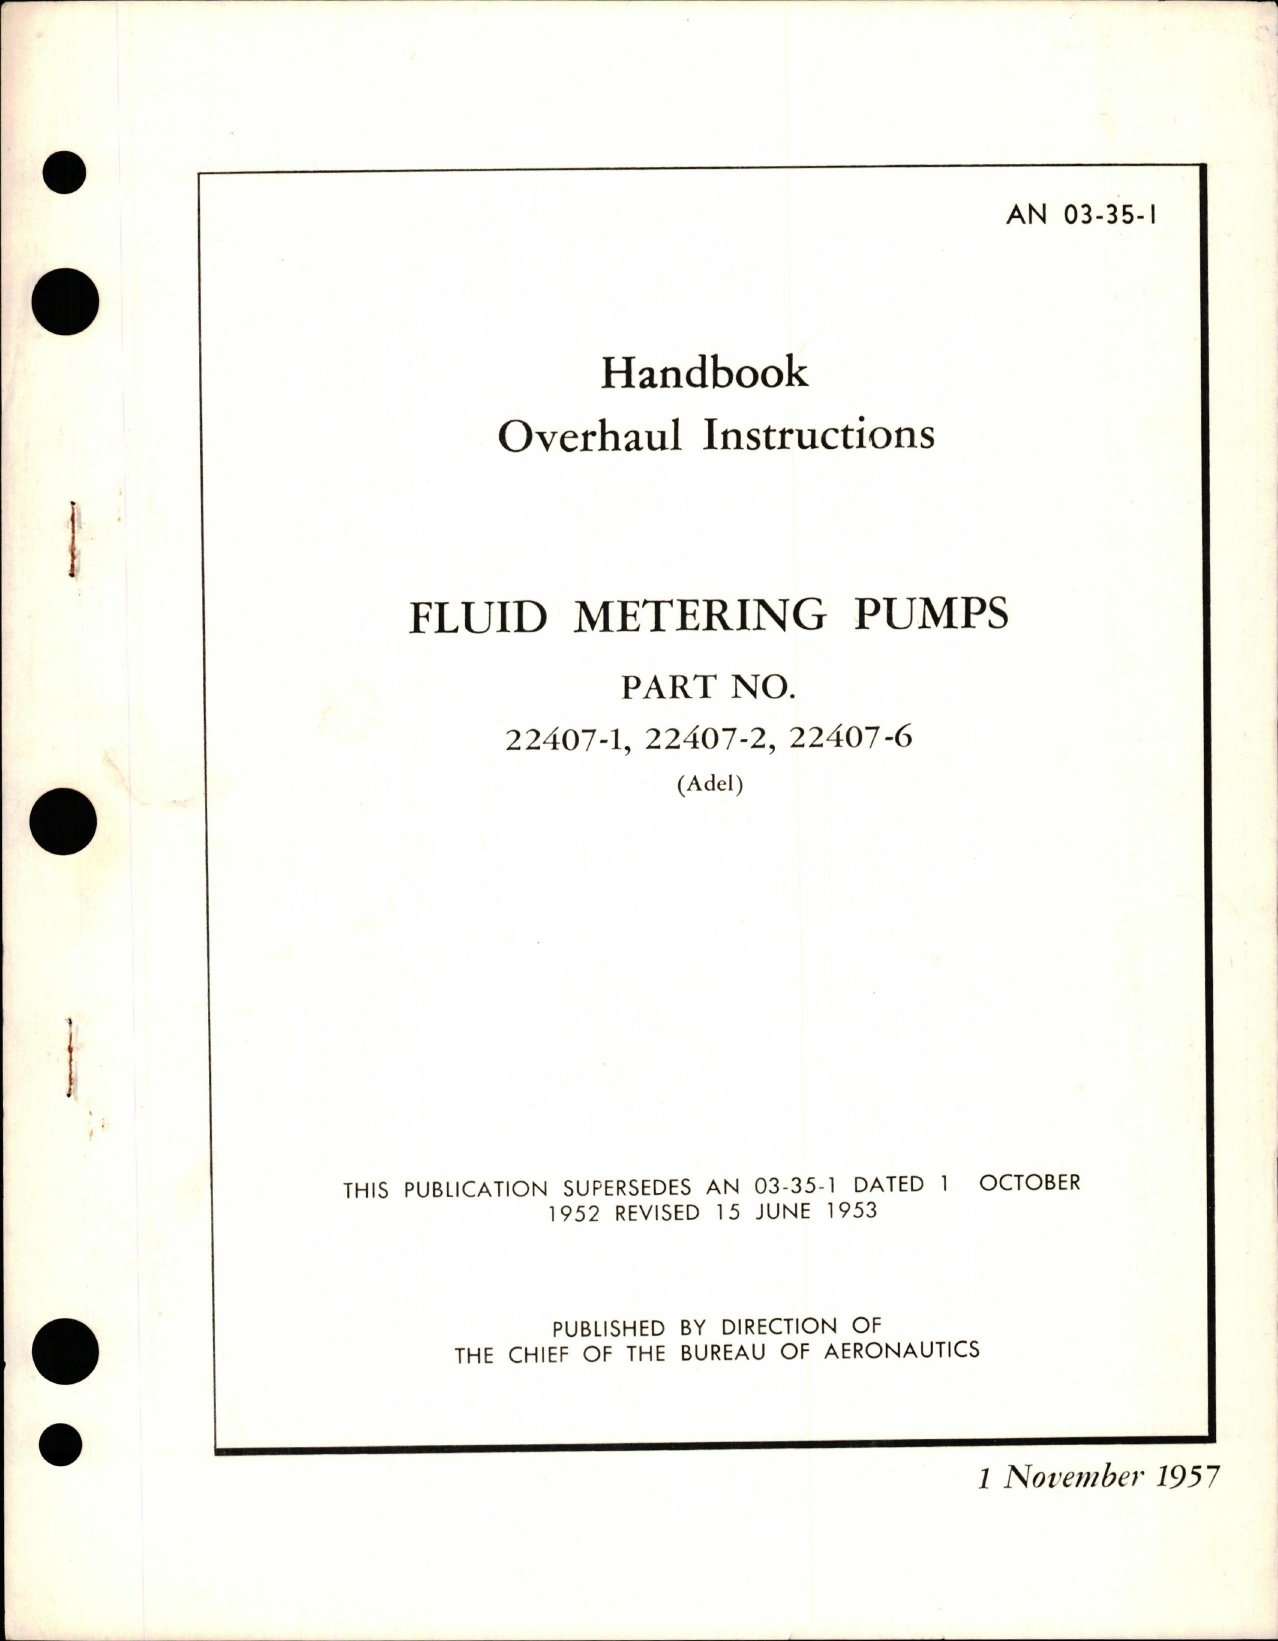 Sample page 1 from AirCorps Library document: Overhaul Instructions for Fluid Metering Pumps - Part 22407-1, 22407-2, and 22407-6 